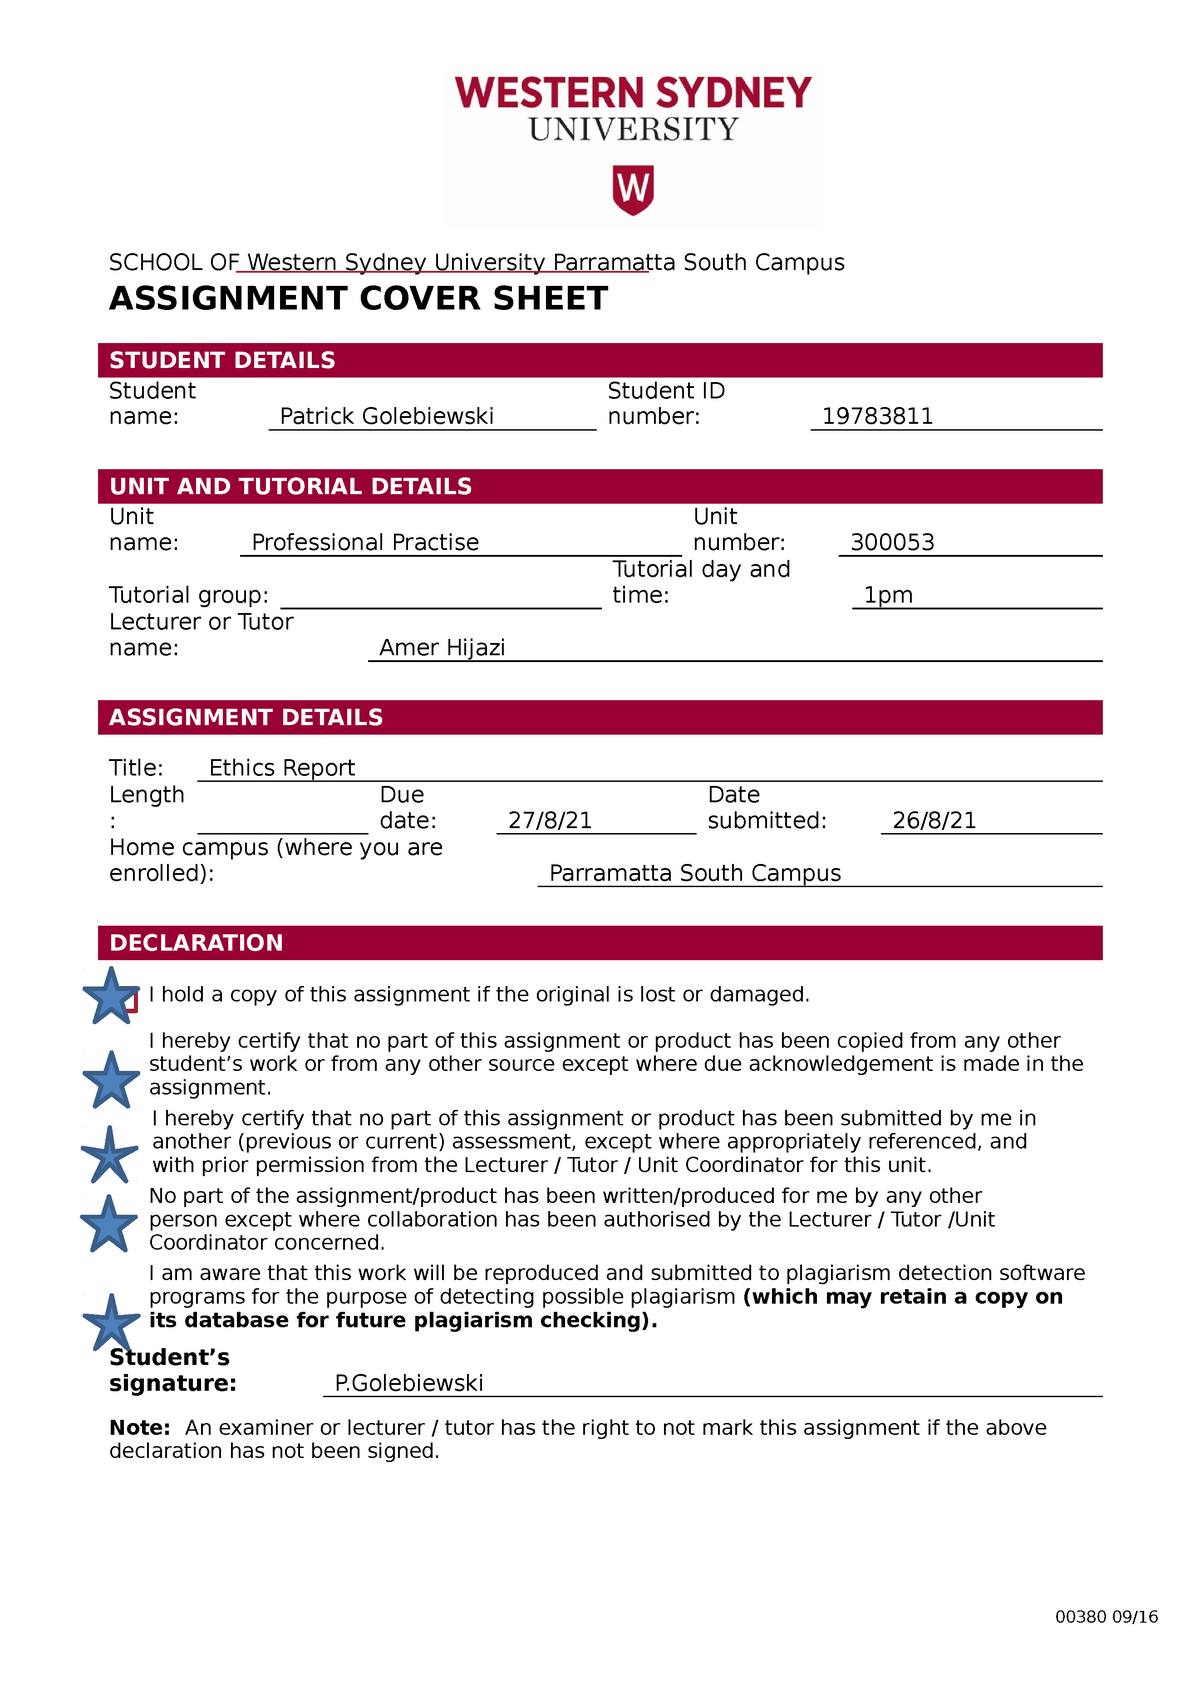 uws individual assignment cover sheet